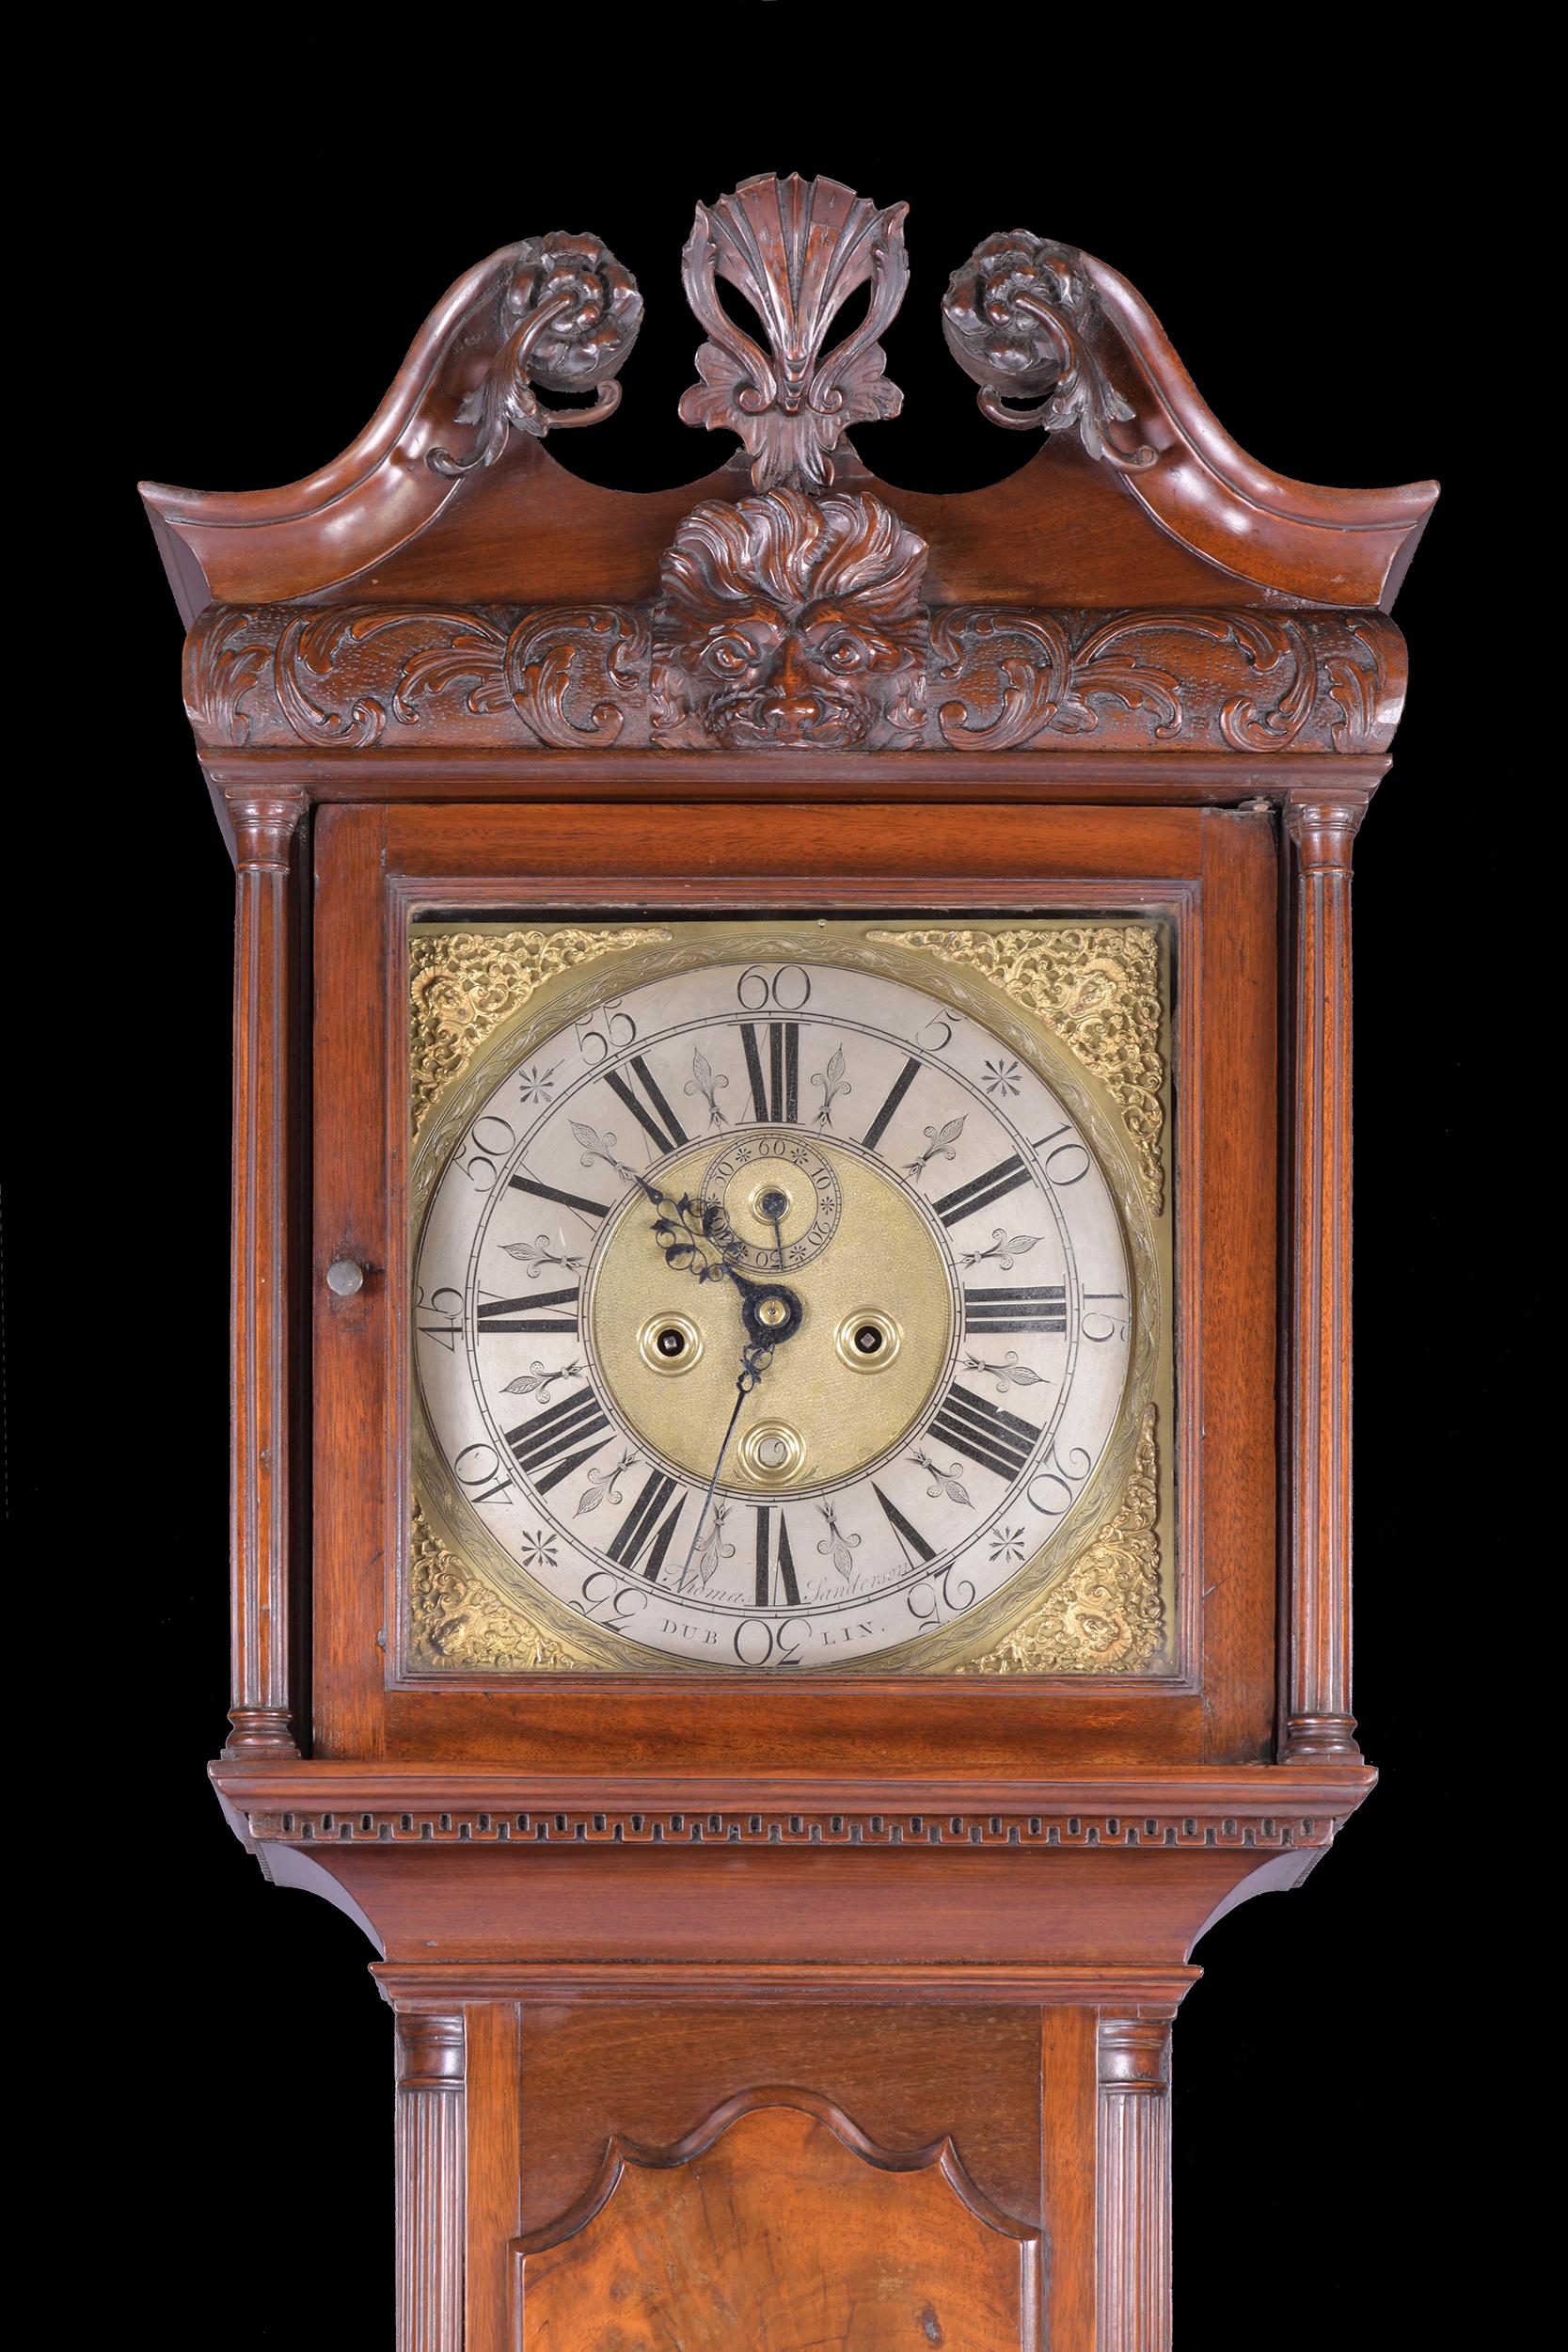 An exceptional early 18th century longcase clock by Thomas Sanderson of Dublin. The 12